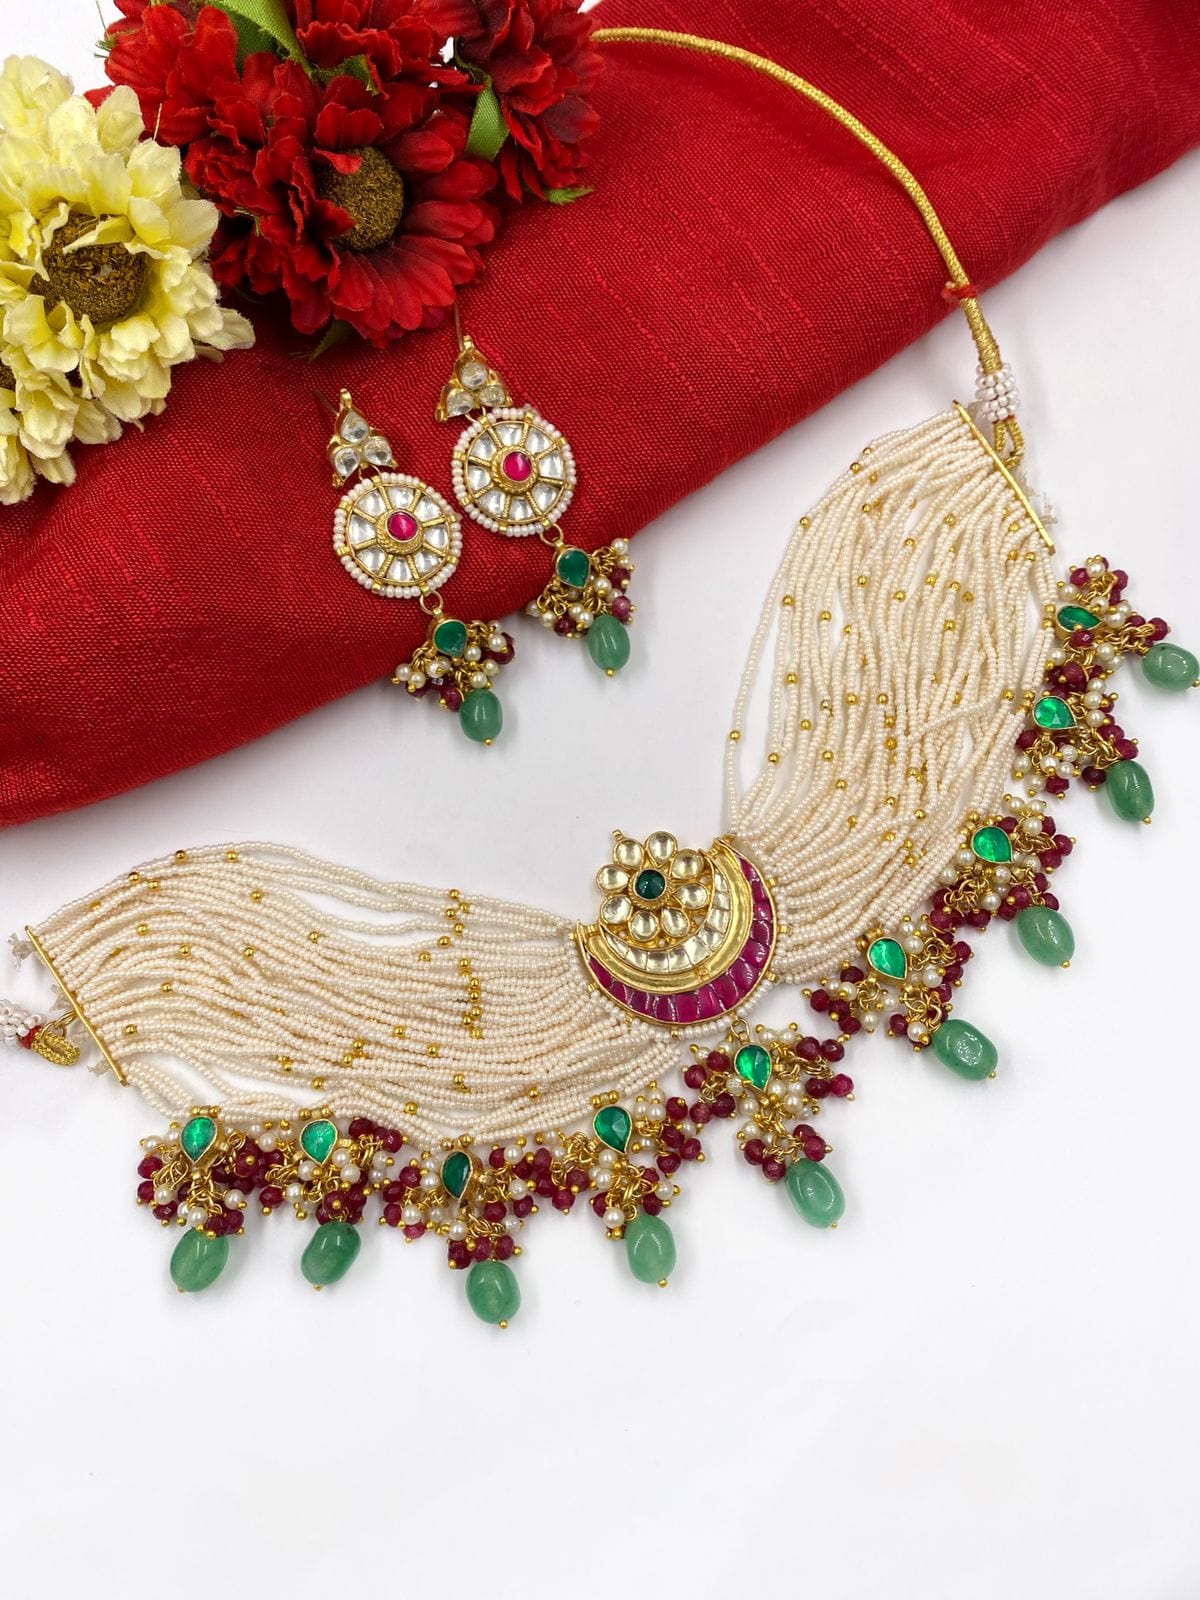 Handcrafted Jadau Kundan And Pearls Choker Necklace Set For Women By Gehna Shop Choker Necklace Set